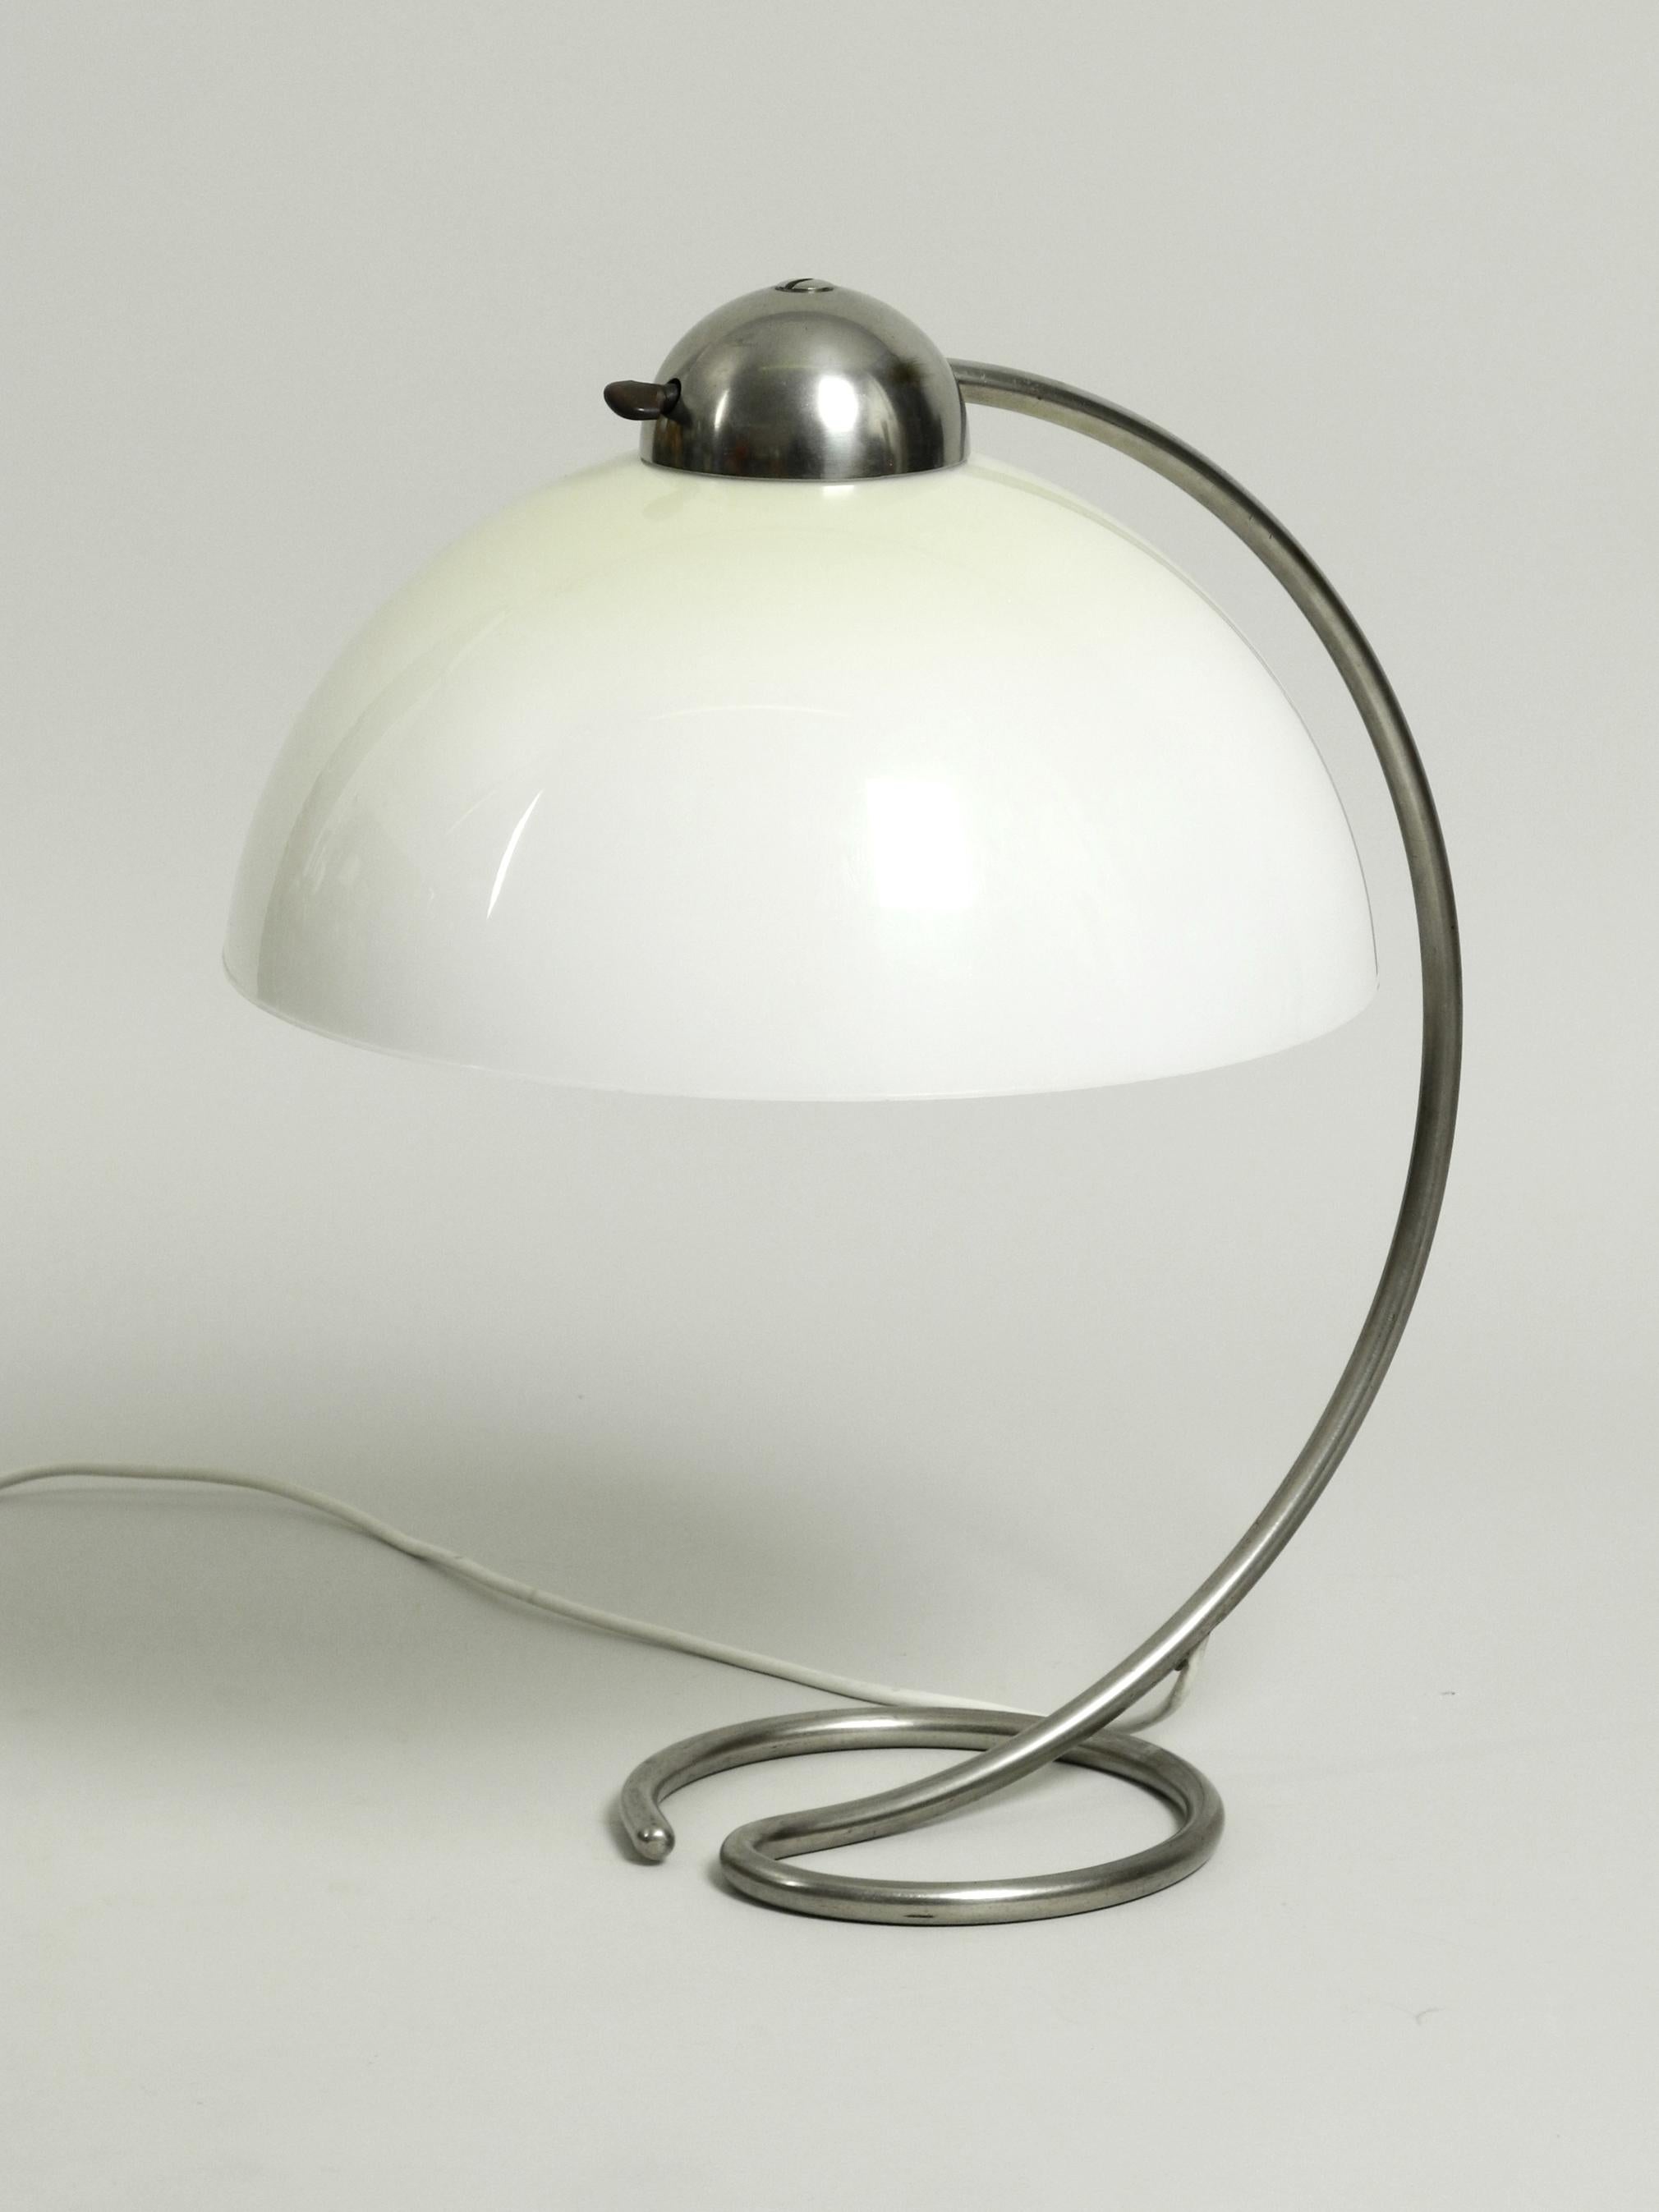 Mid-20th Century Large Midcentury Metal Table Lamp with Plastic Shade by Schanzenbach, Germany For Sale